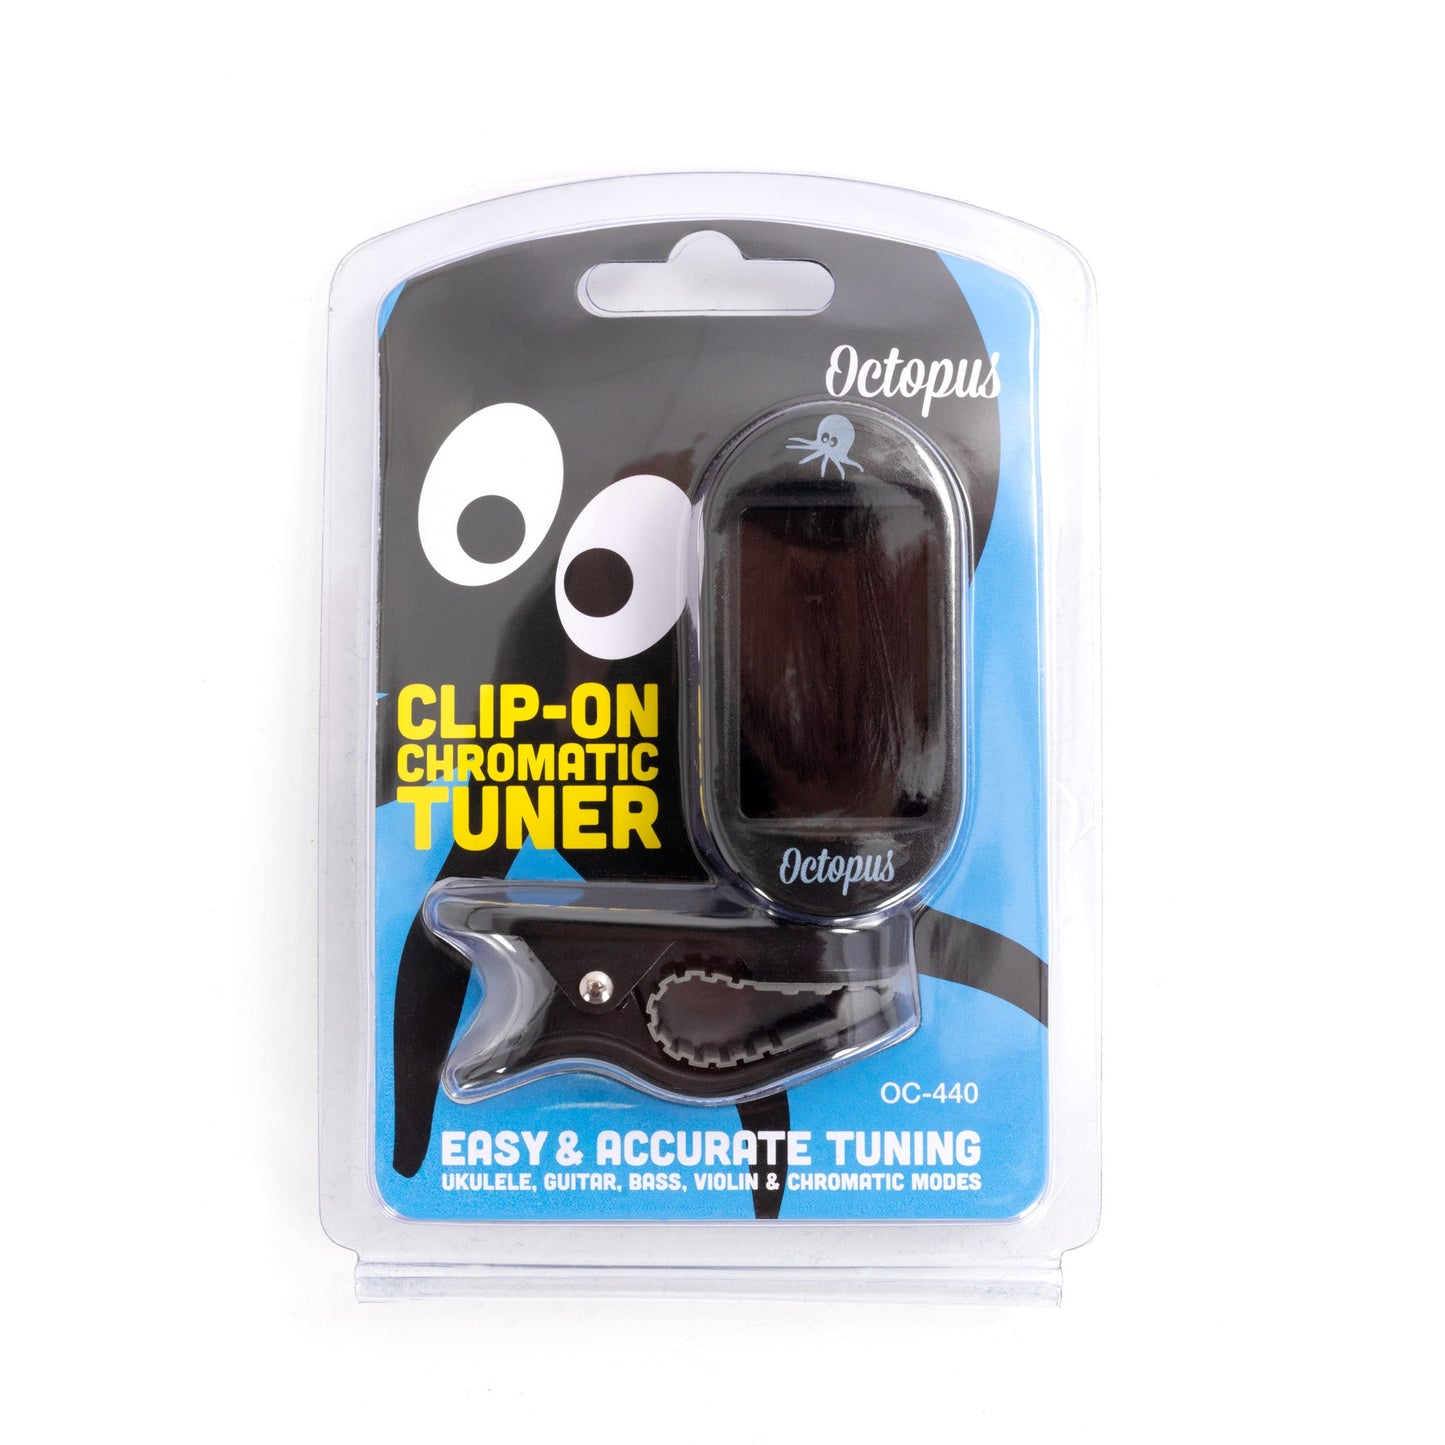 Octopus OC-440 Clip on Tuner with LCD screen